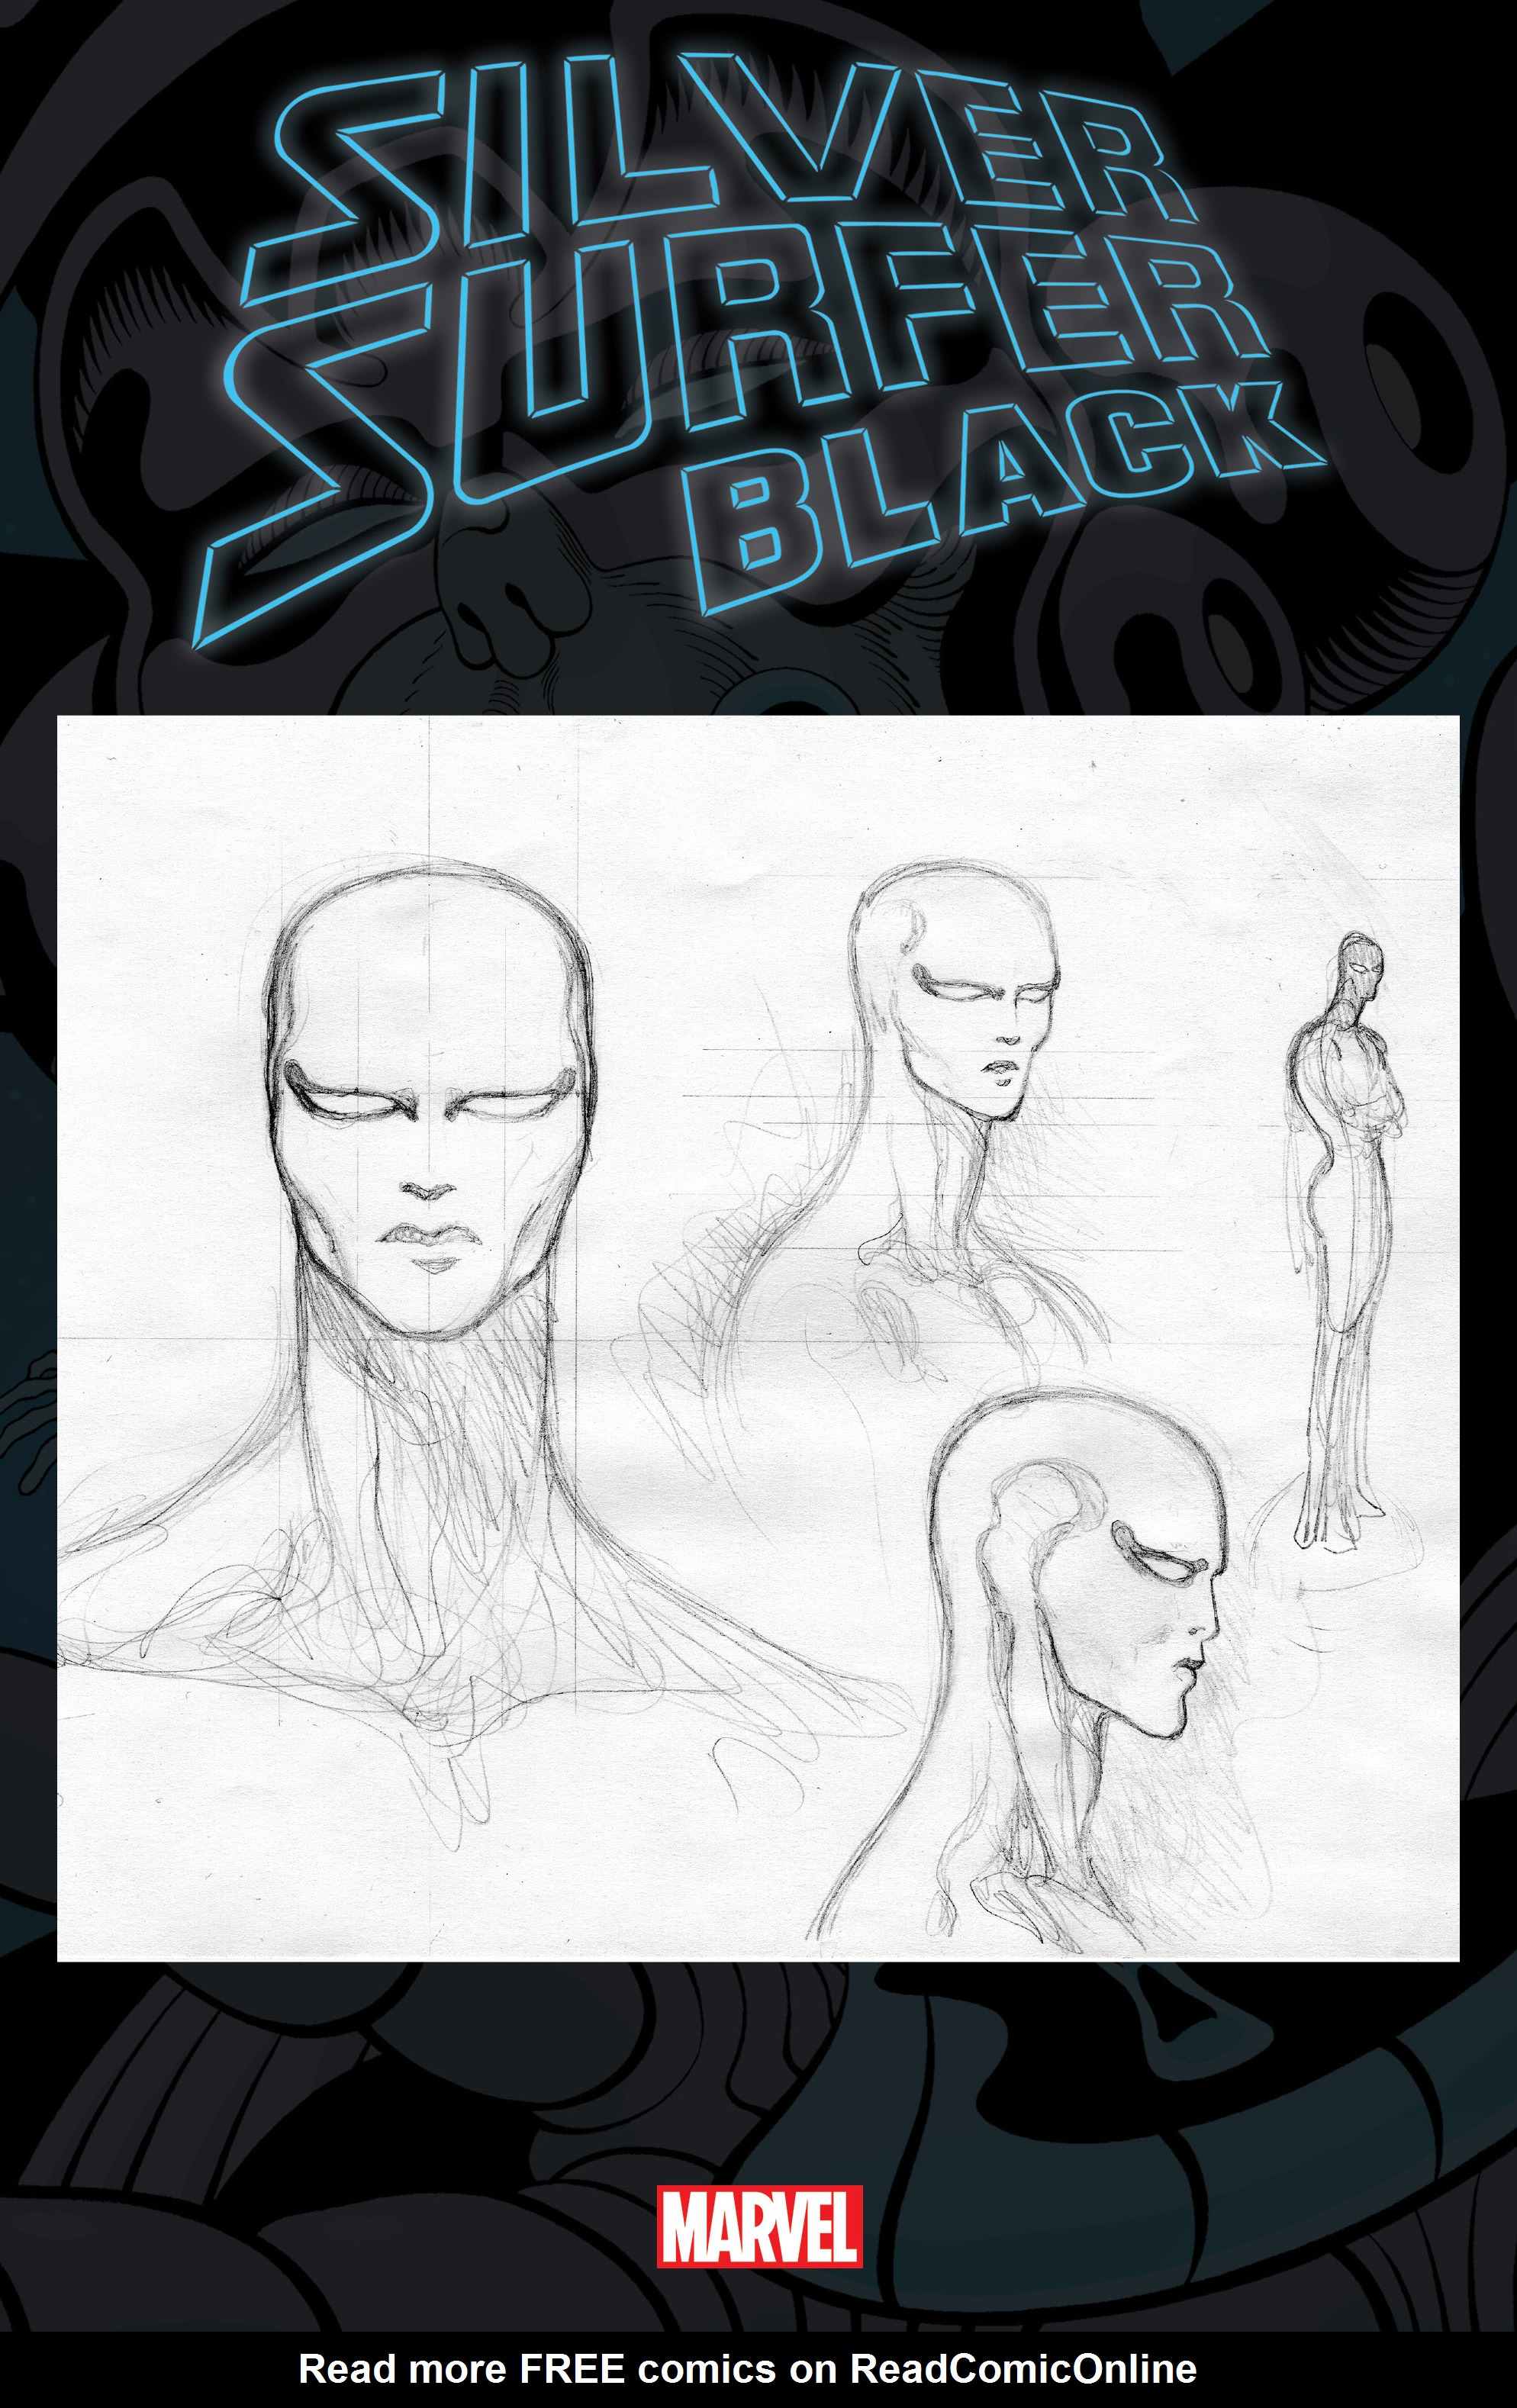 Read online Silver Surfer: Black comic -  Issue # _Director_s_Cut - 111